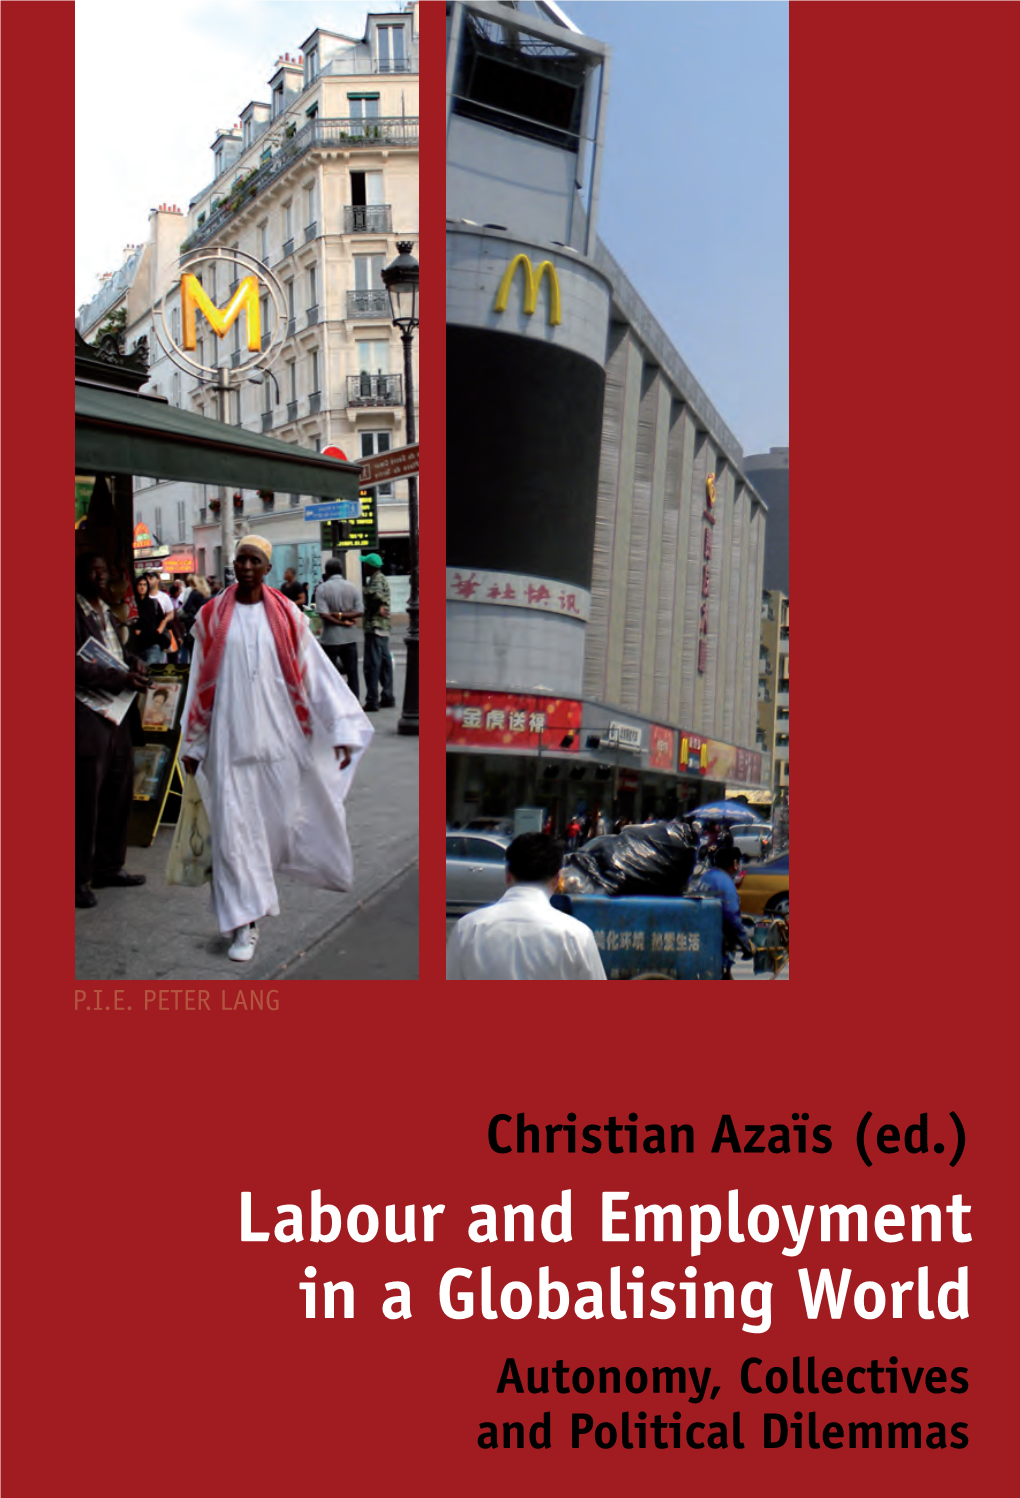 Labour and Employment in a Globalising World. Autonomy